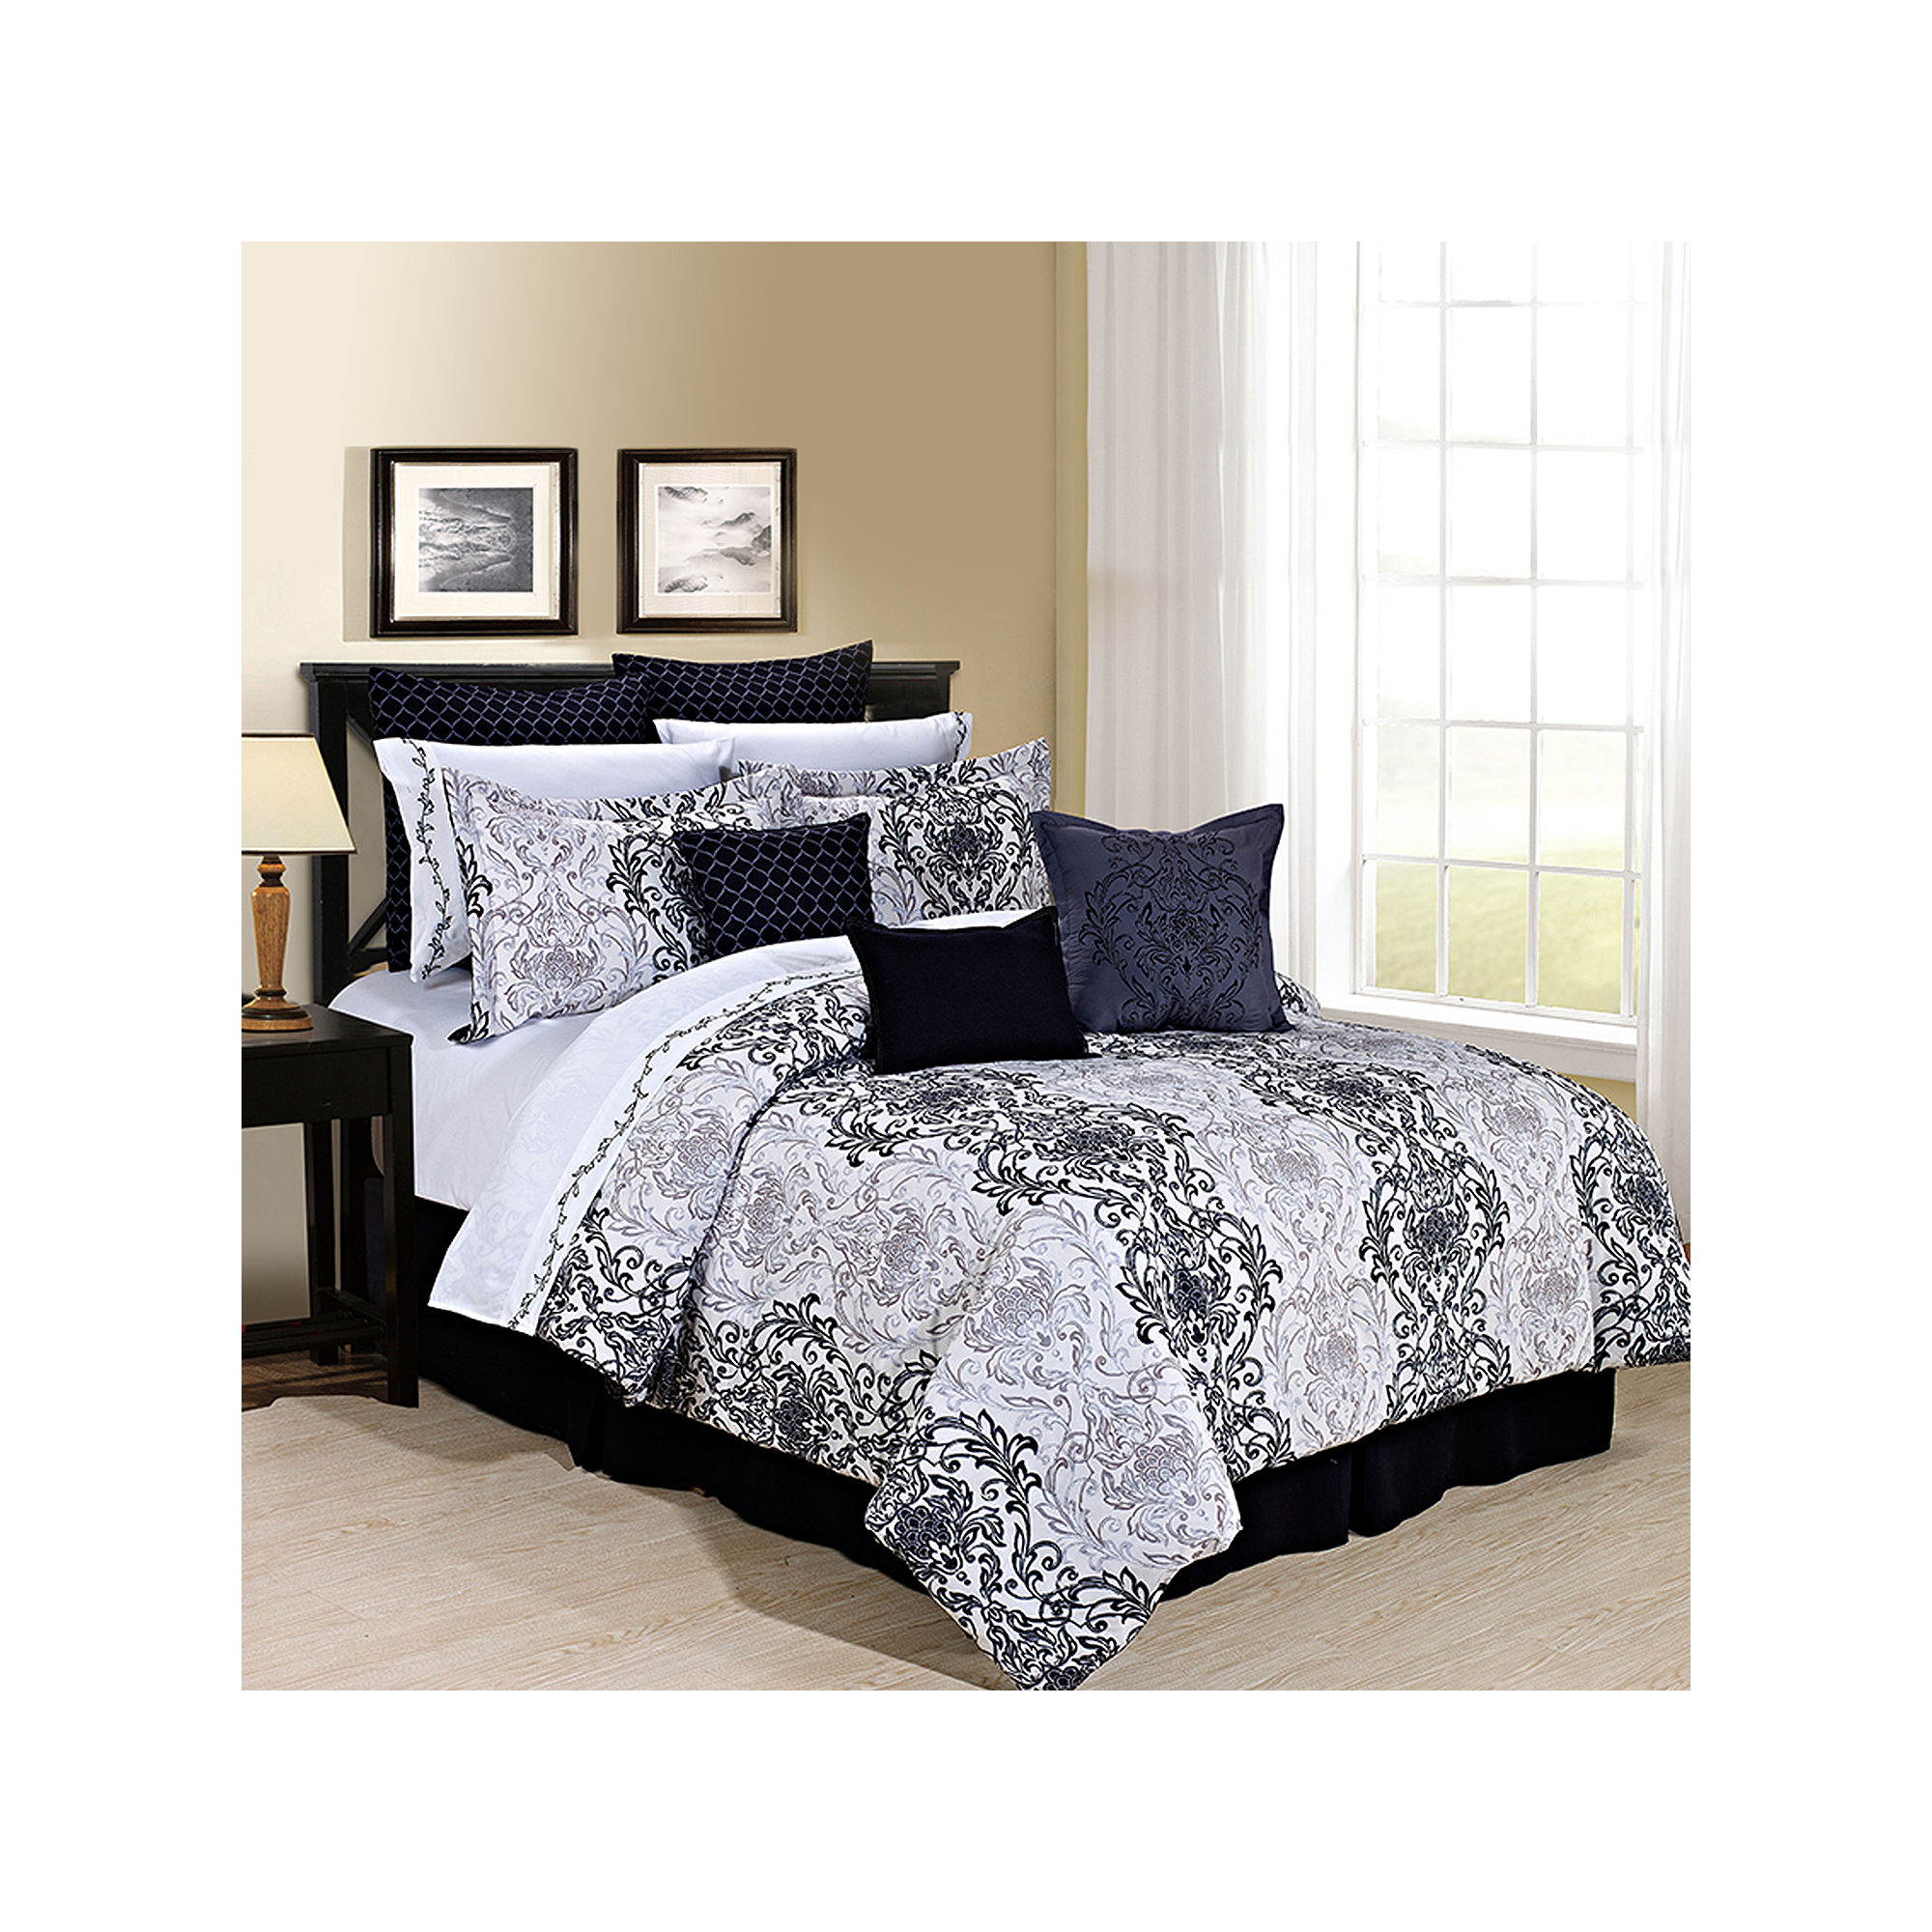 Cathay Home Aerylin Complete Bedding Set with Sheets